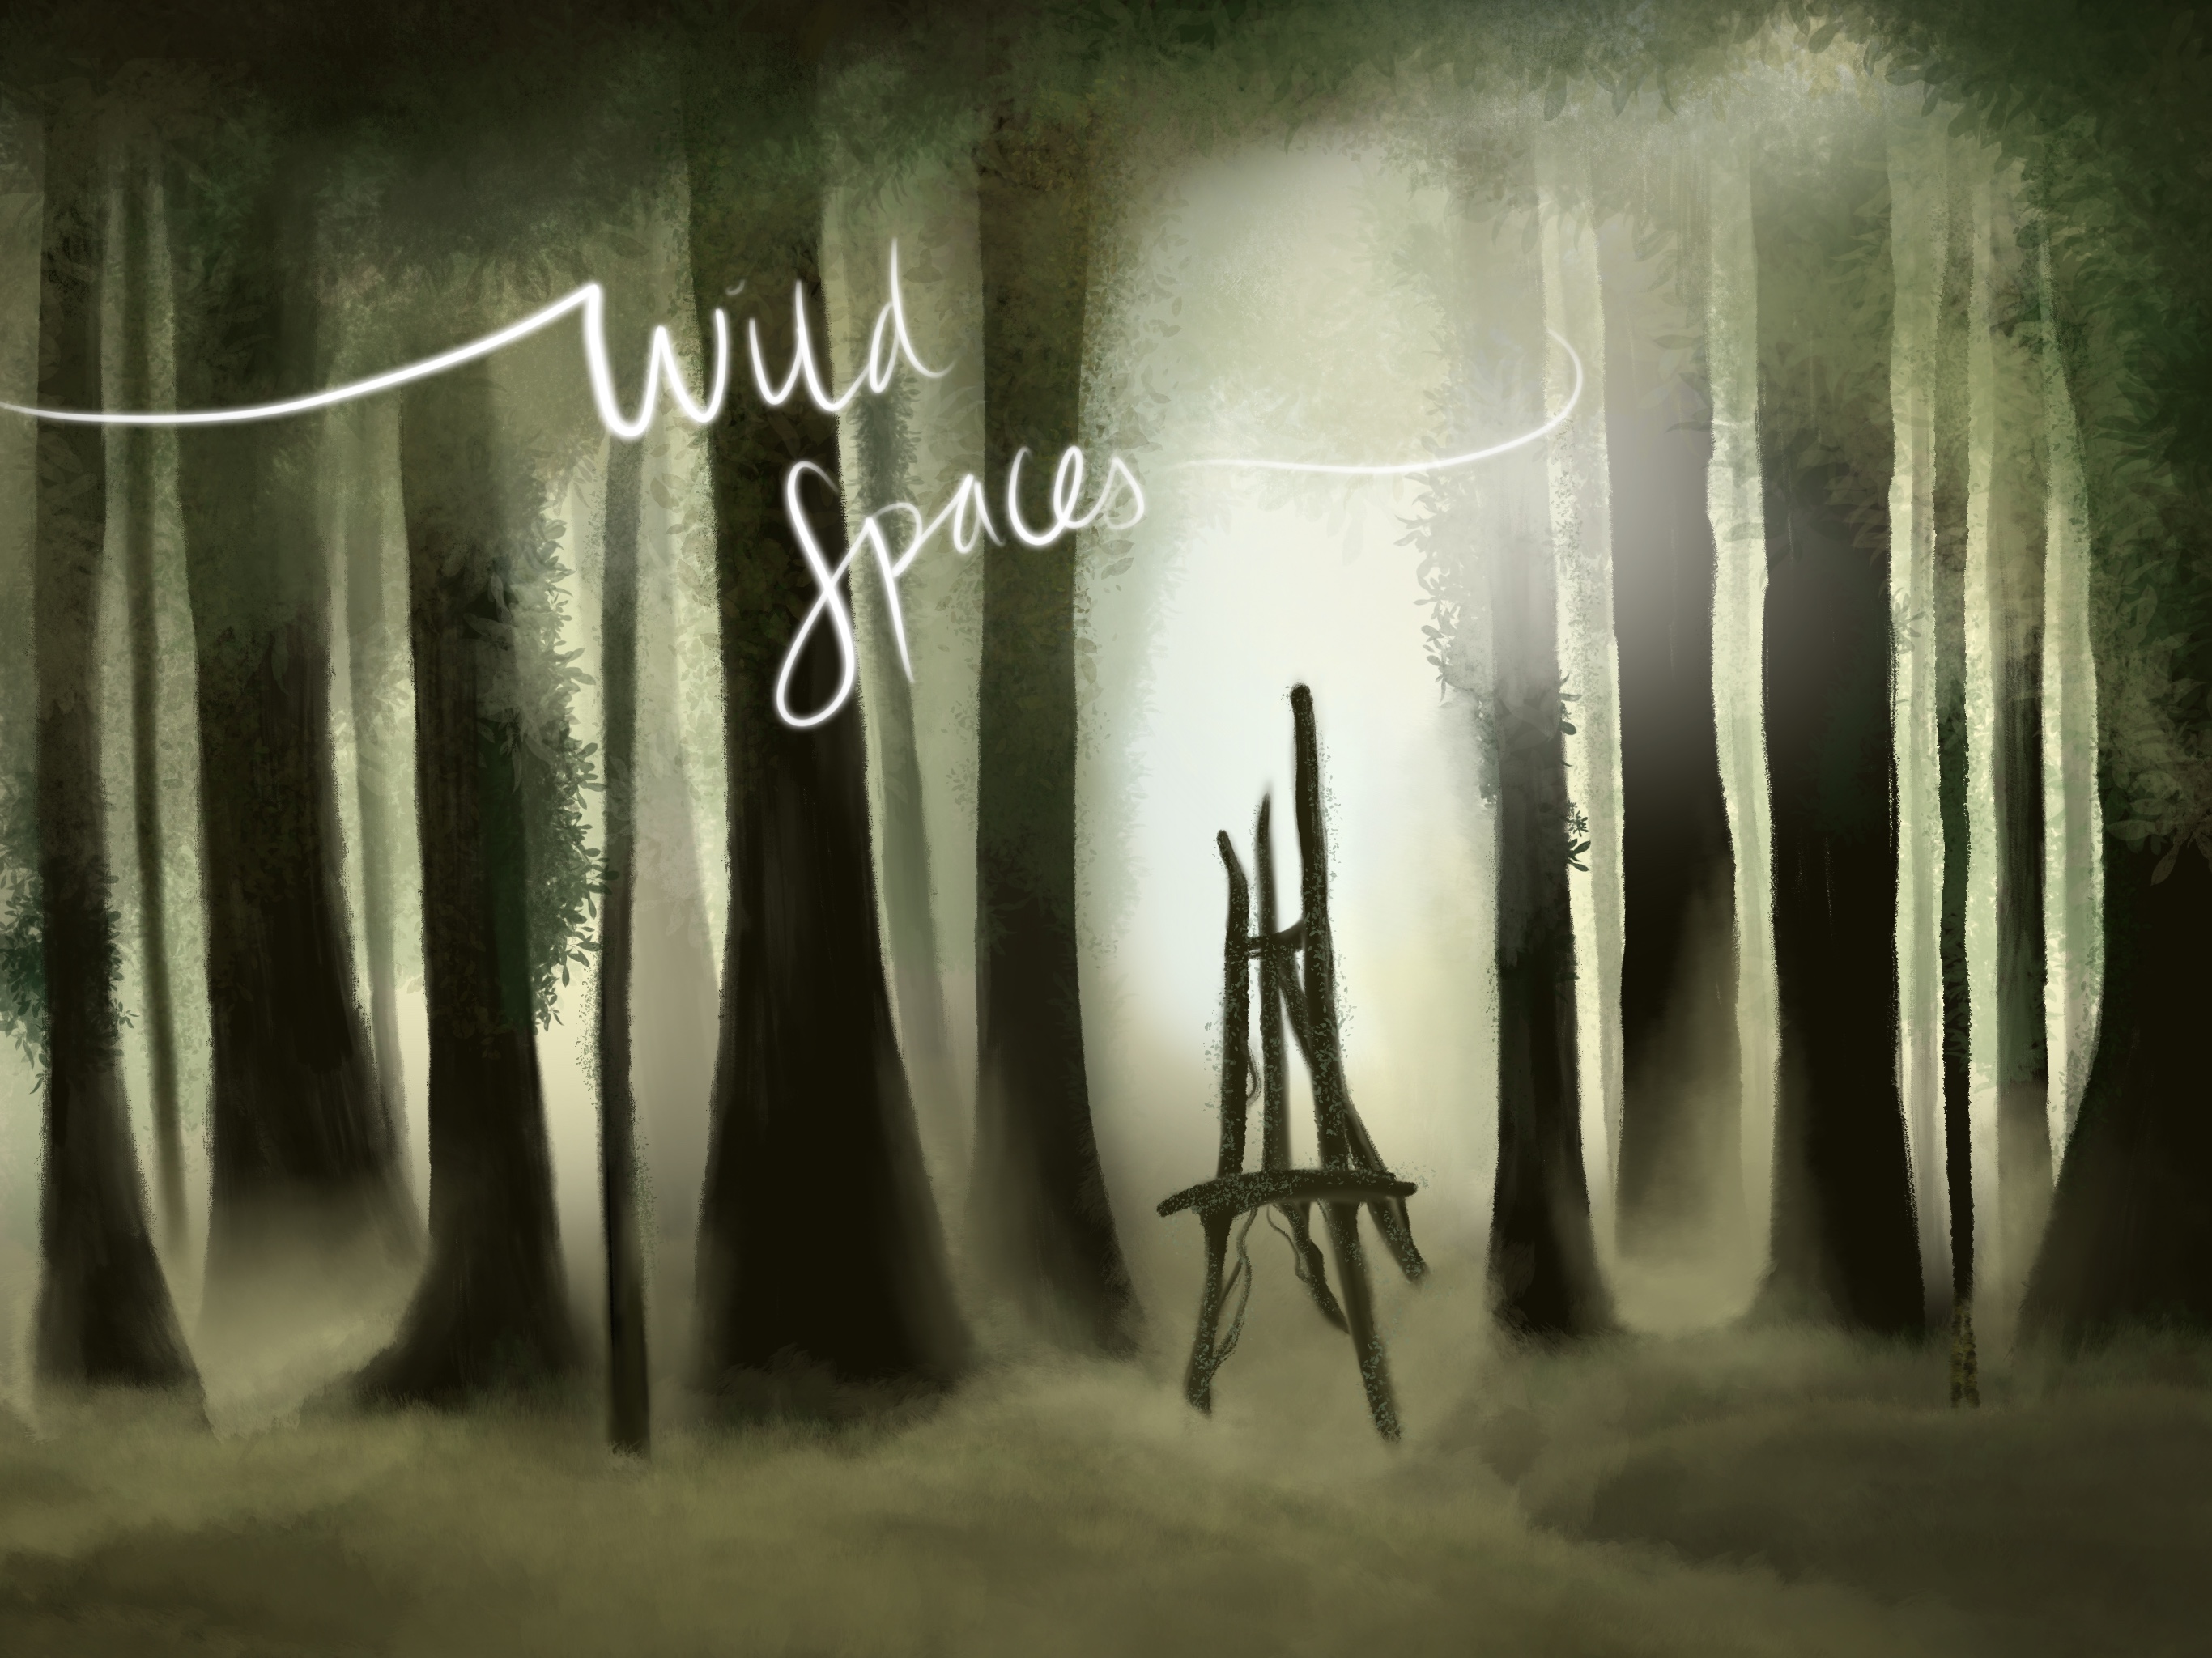 Image of an illustrated forest with a wooden easel in the centre and the words "Wild Spaces" drawn across